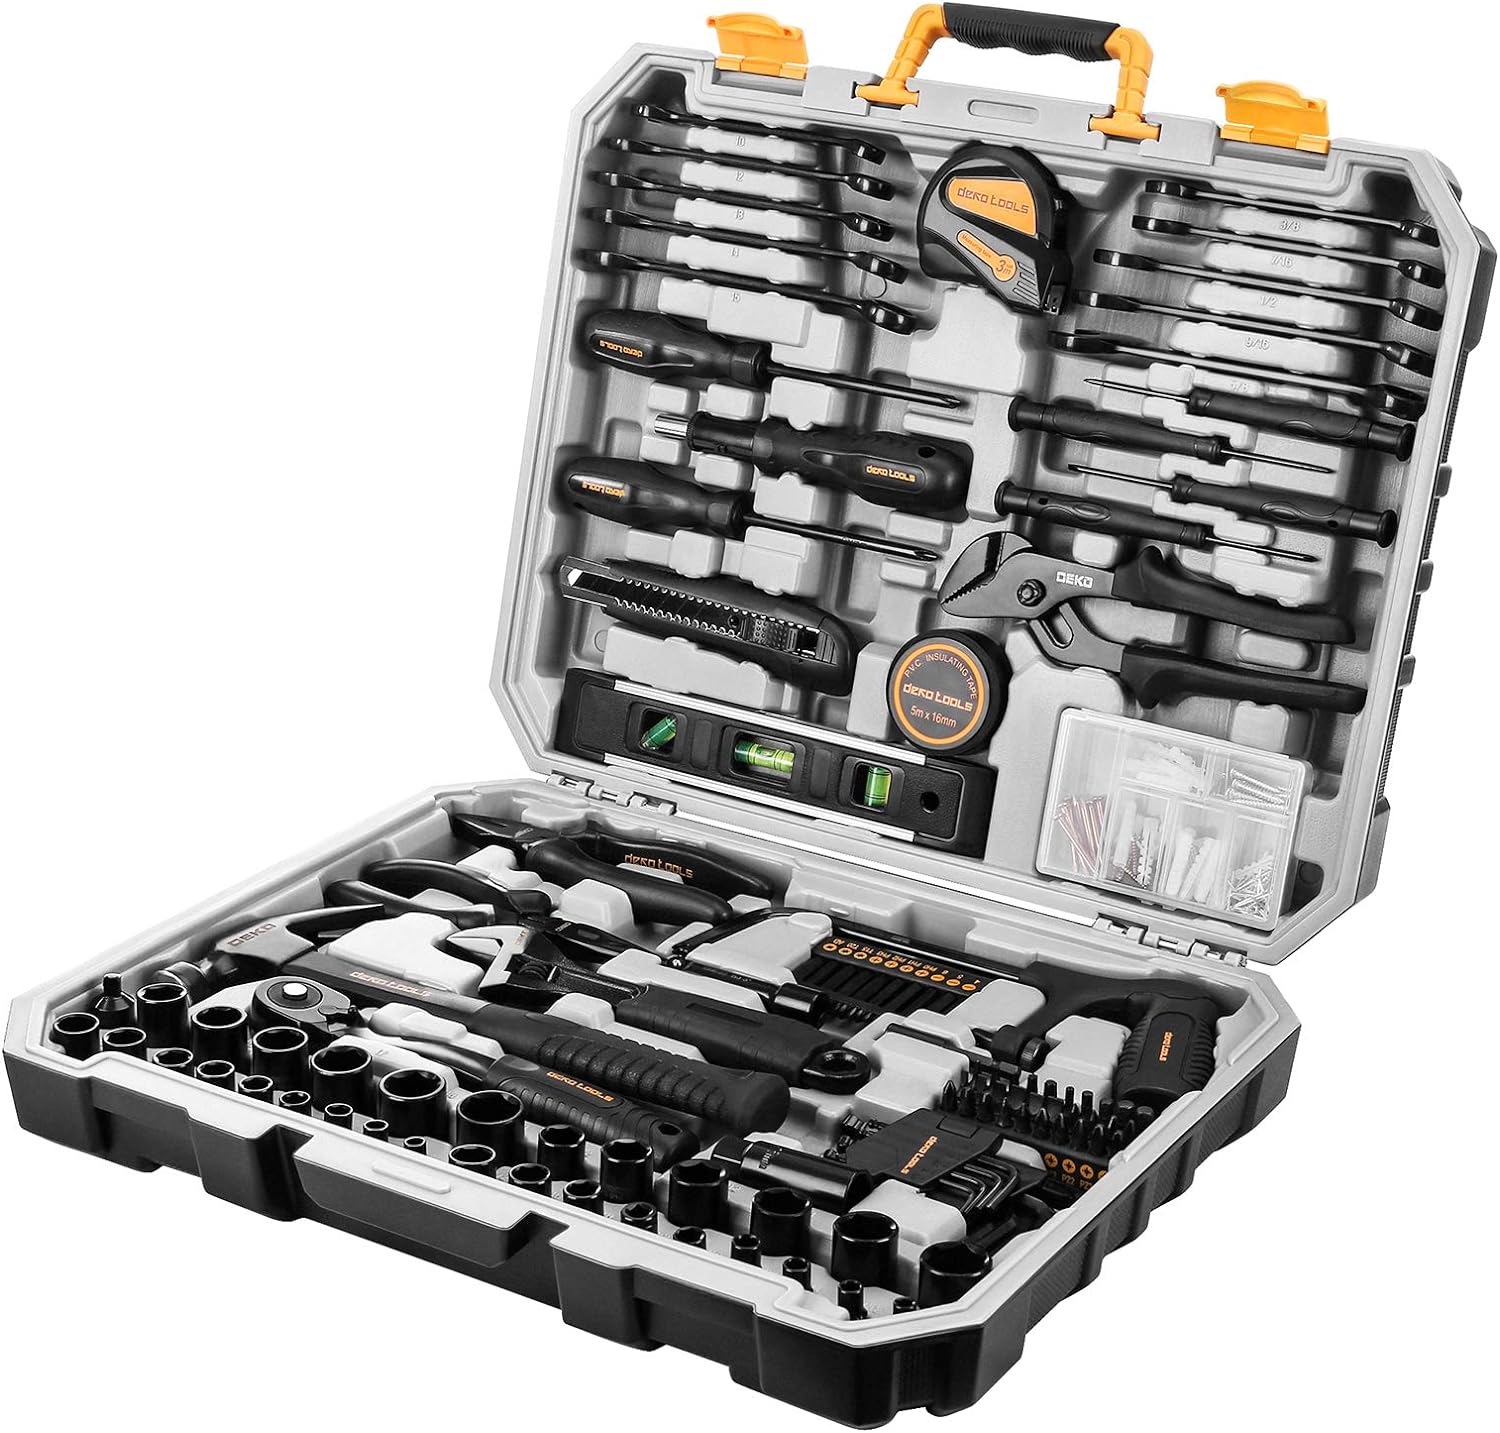 Professional Auto Repair Tool Set for Homeowner with Portable Storage Case Screwdriver Set DEKOPRO 218-Piece General Household Hand Tool kit General Household Hand Tool Set with Plier Socket Set